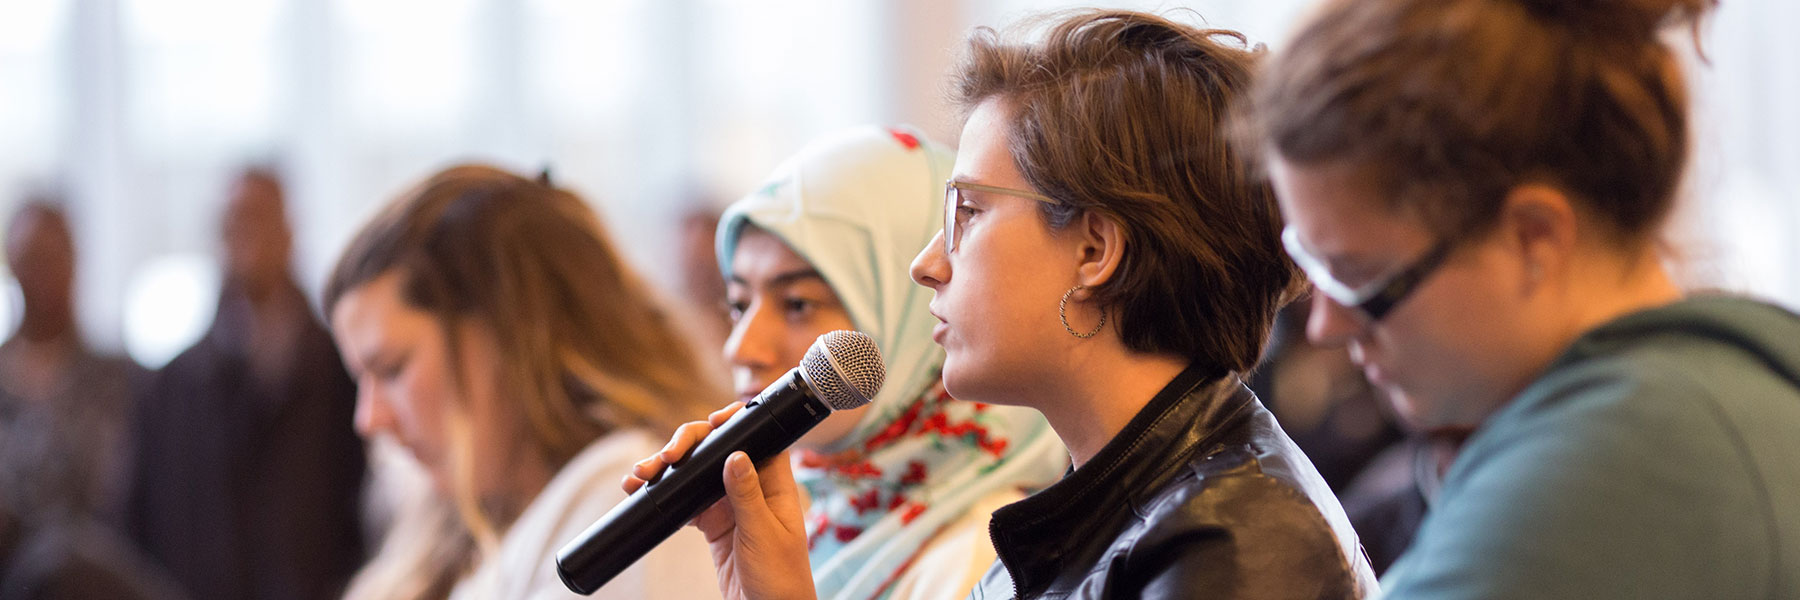 Female student holds microphone and speaks to audience